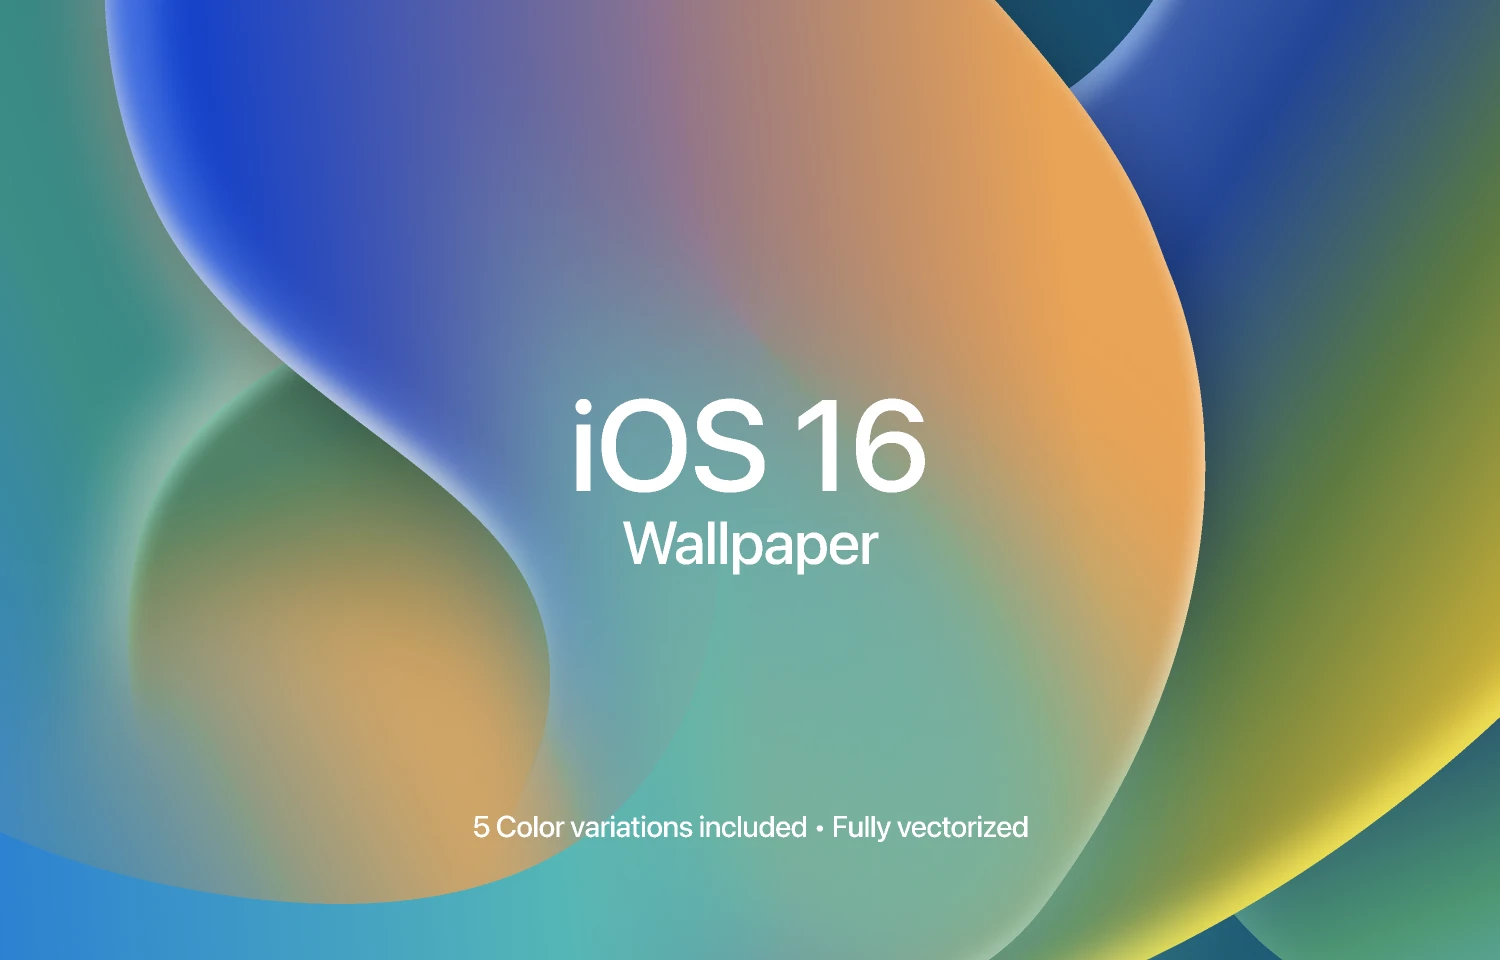 iOS 16 Wallpaper for Figma and Adobe XD